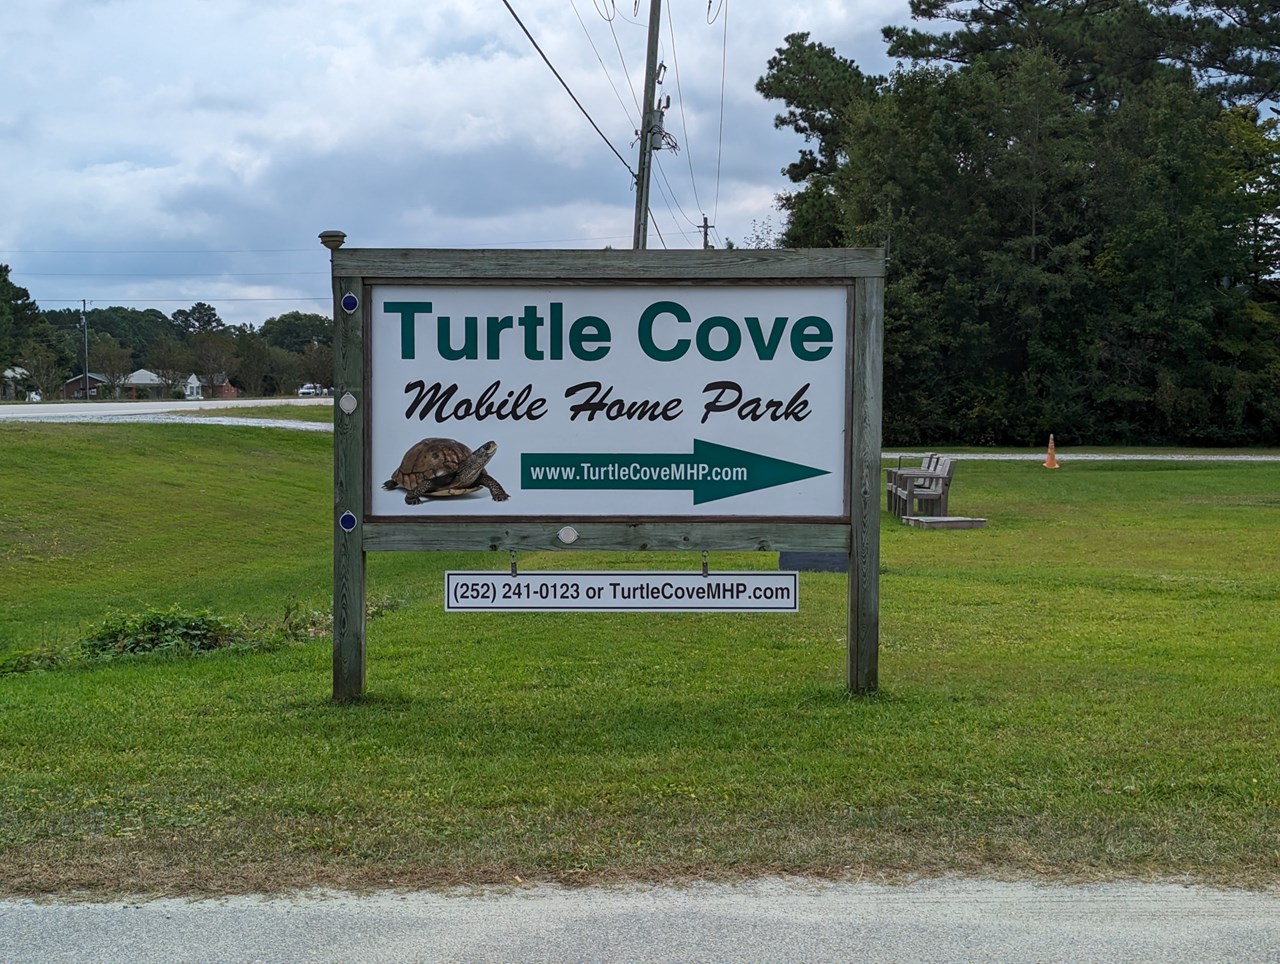 entrance at freedom way (hwy 24) and turtle cove rd